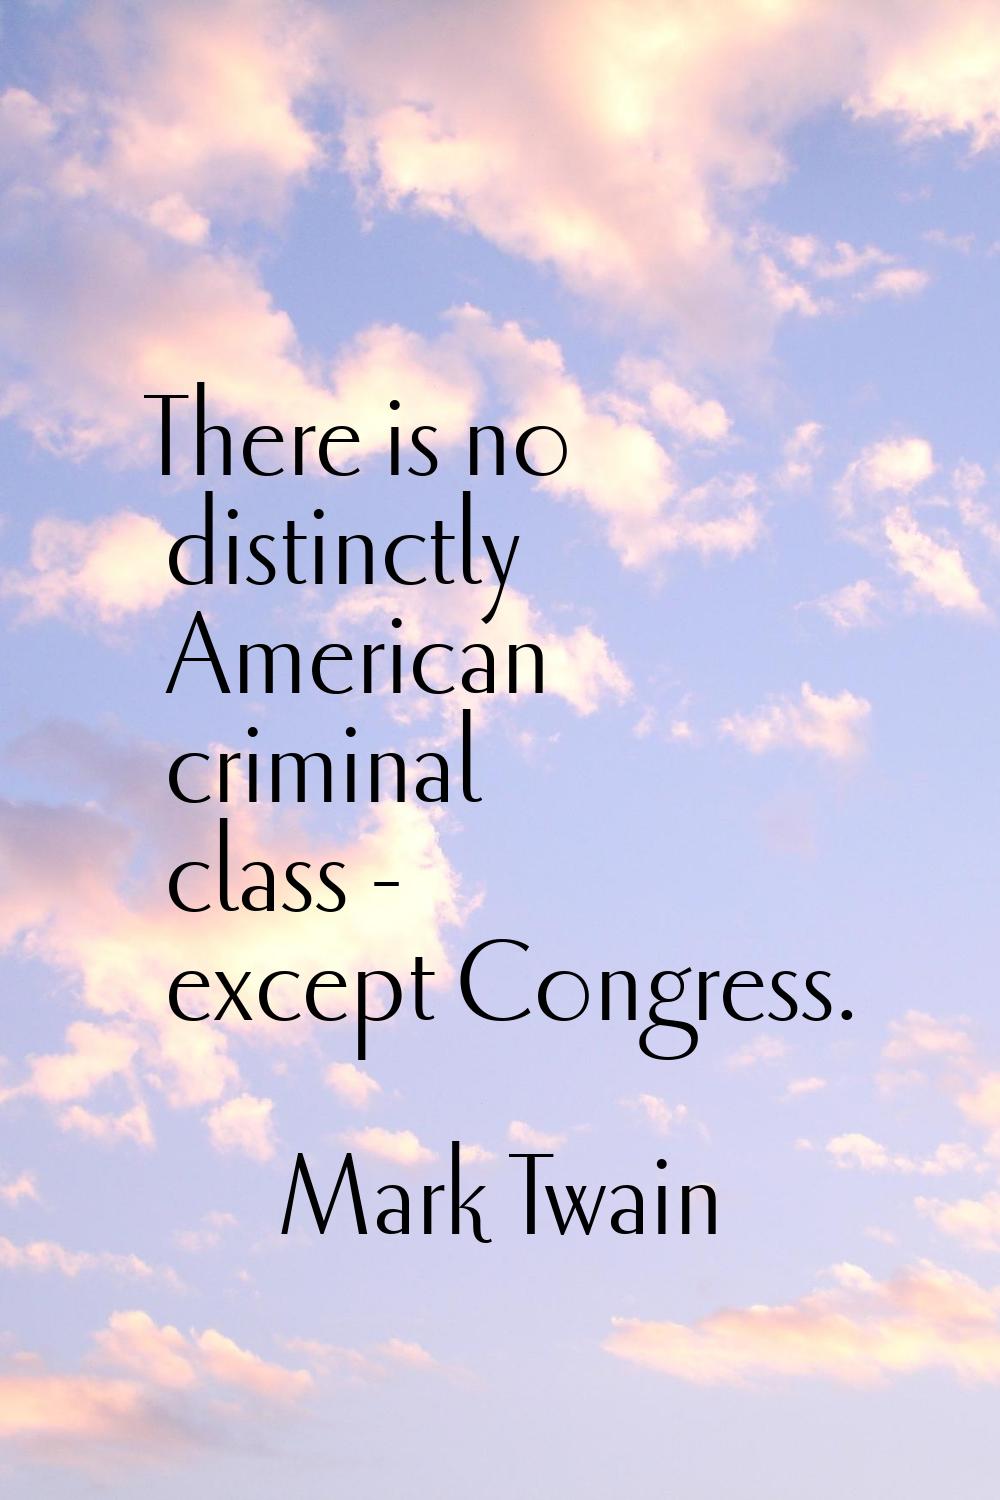 There is no distinctly American criminal class - except Congress.